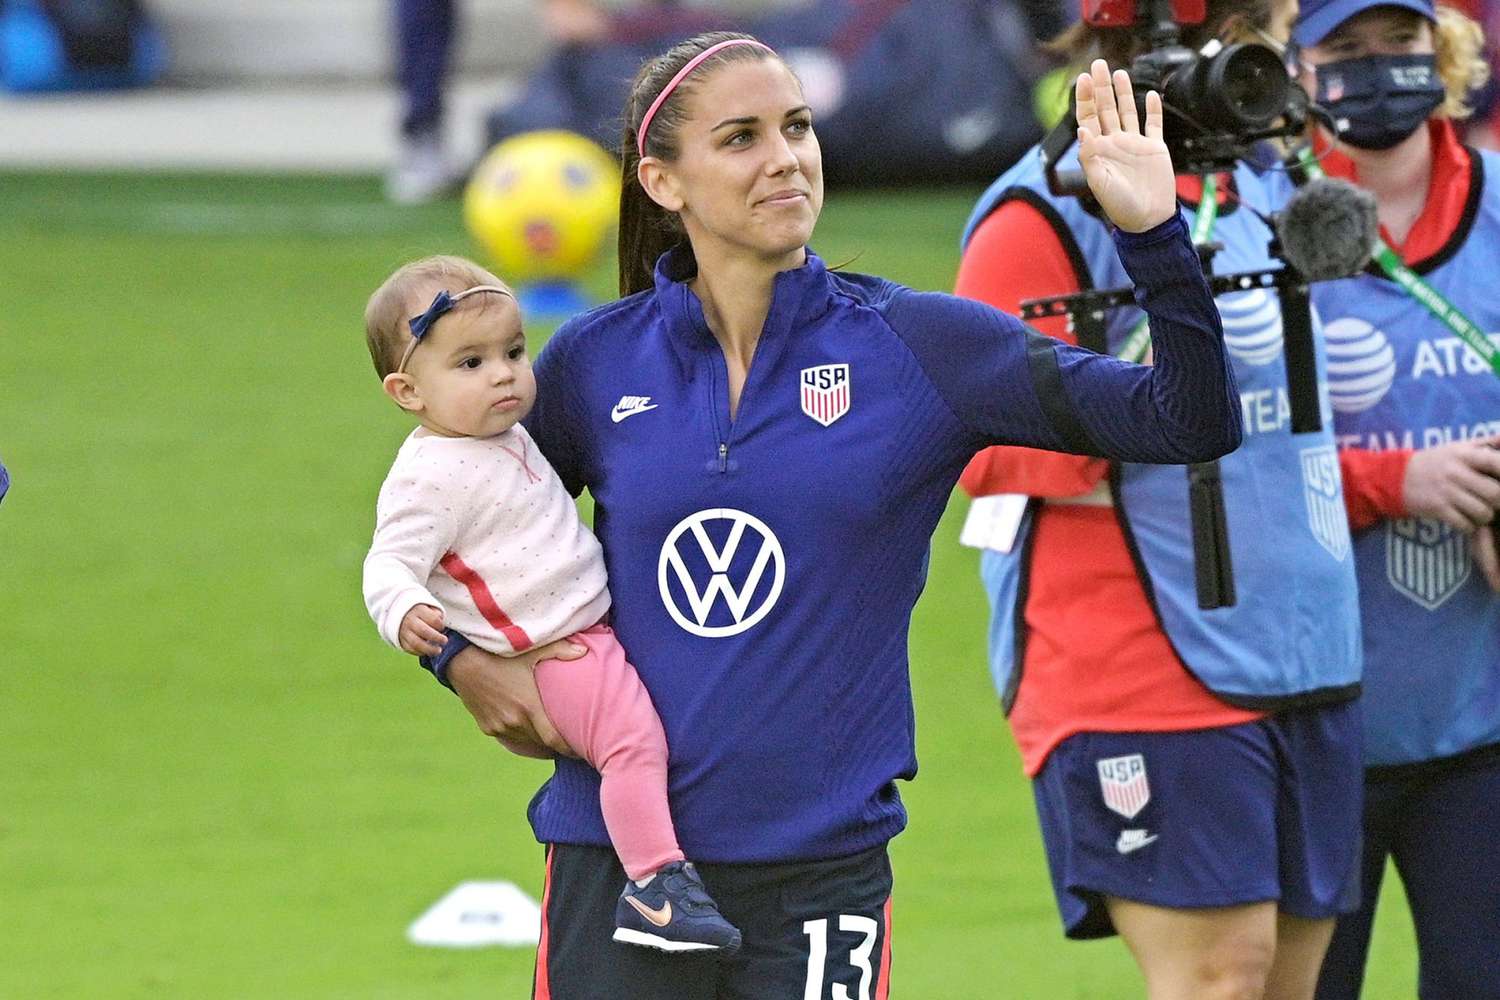 United States forward Alex Morgan (13) waves to fans in the stands while holding her daughter Charlie Elena Carrasco after a SheBelieves Cup women's soccer match against Brazil, in Orlando, Fla